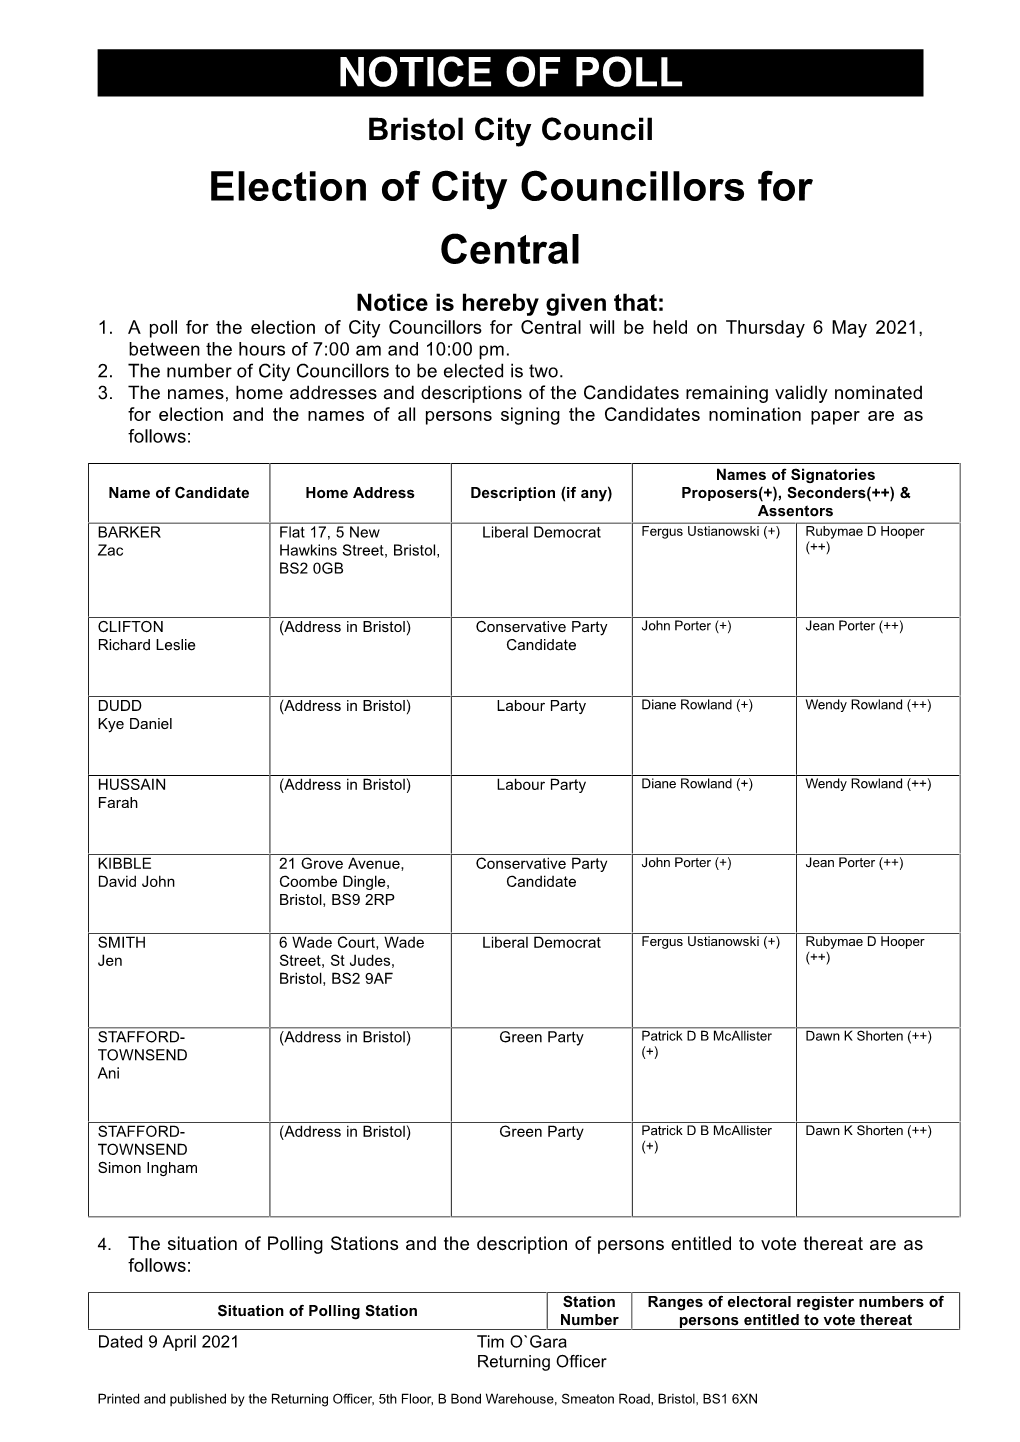 Notice of Poll: Election of City Councillors for Central (Pdf, 65KB)